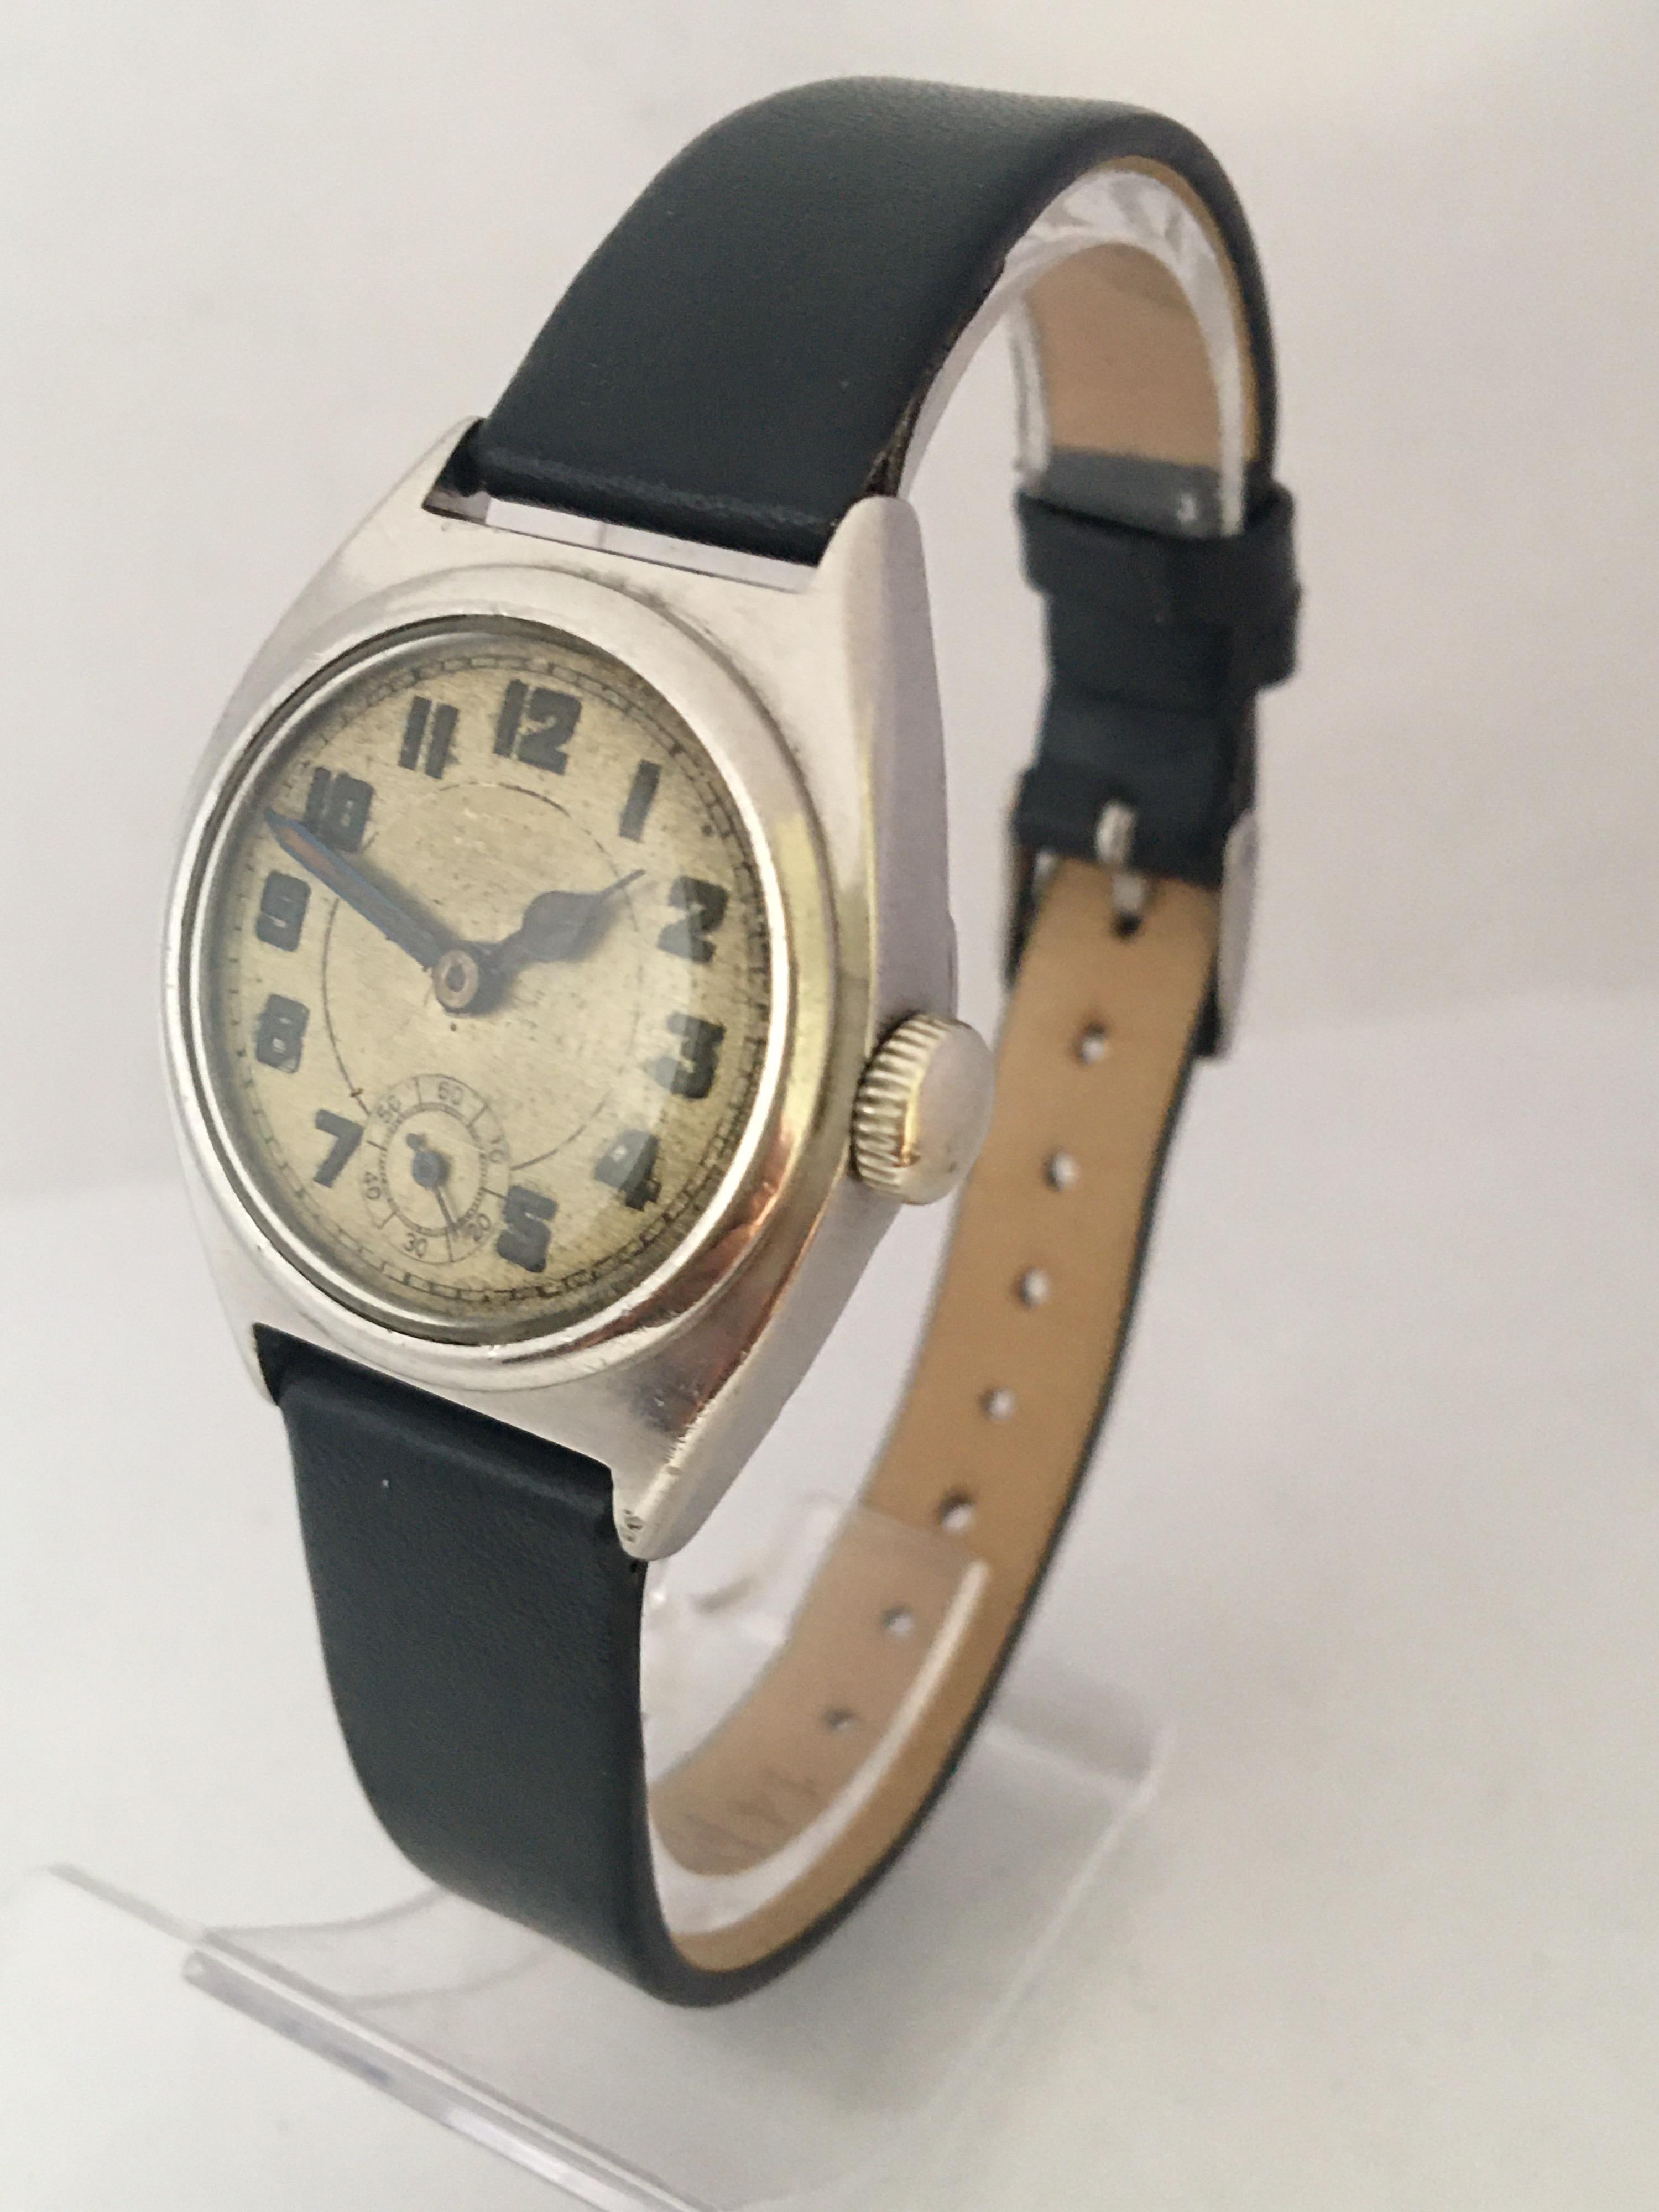 This beautiful pre-own 30mm vintage hand-winding watch is good working condition and it is running well.  The dial is a bit worn. Some scratches on the watch back case and the Bessel as shown. 

Please study the images carefully as form part of the